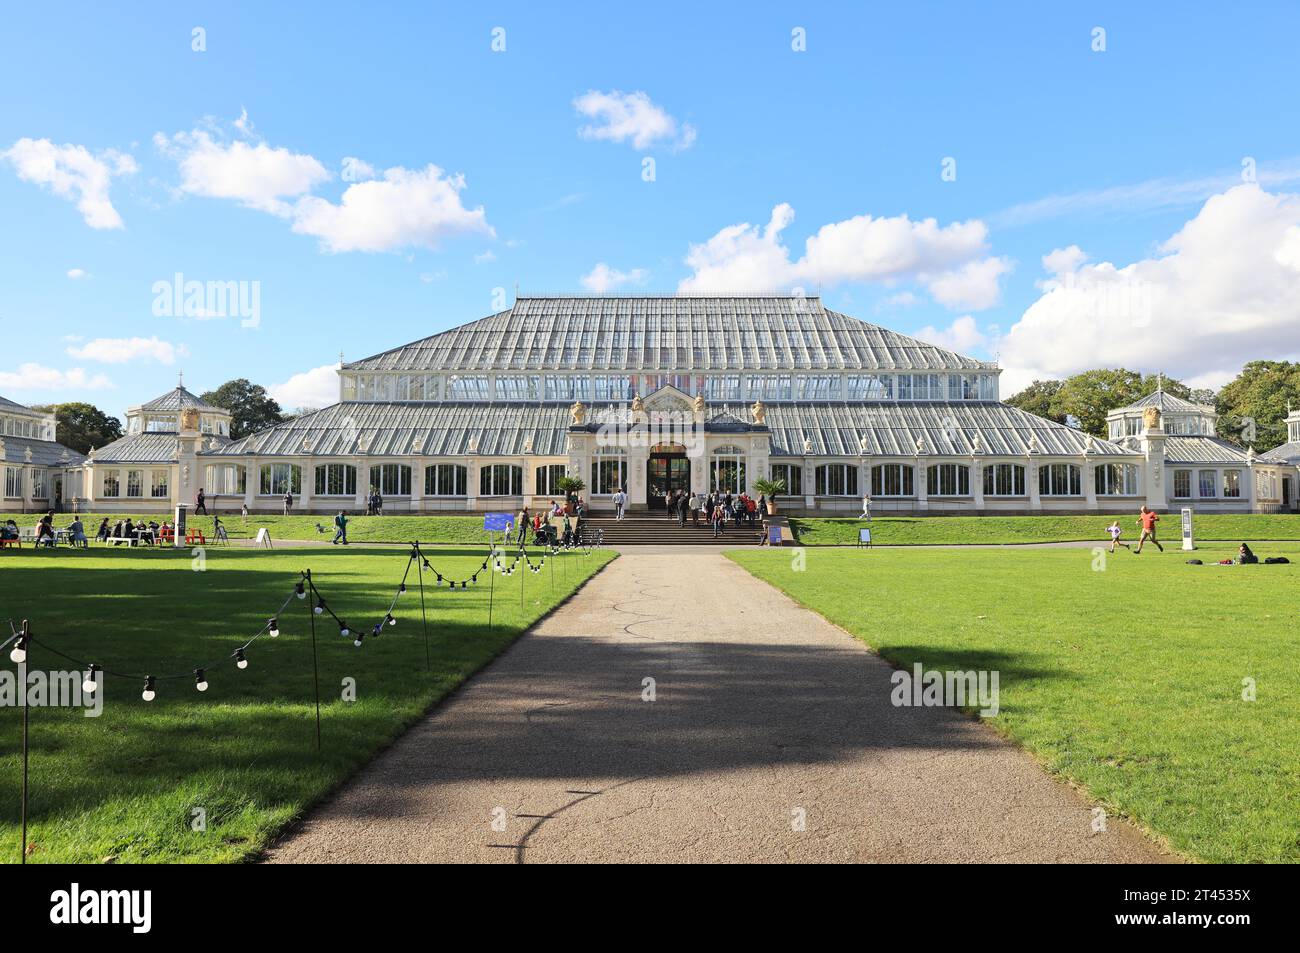 The Temperate House, opened in 1863 and a Grade 1 listed & iconic showhouse for Kew Garden's largest plants from the world's temperate zones, London. Stock Photo